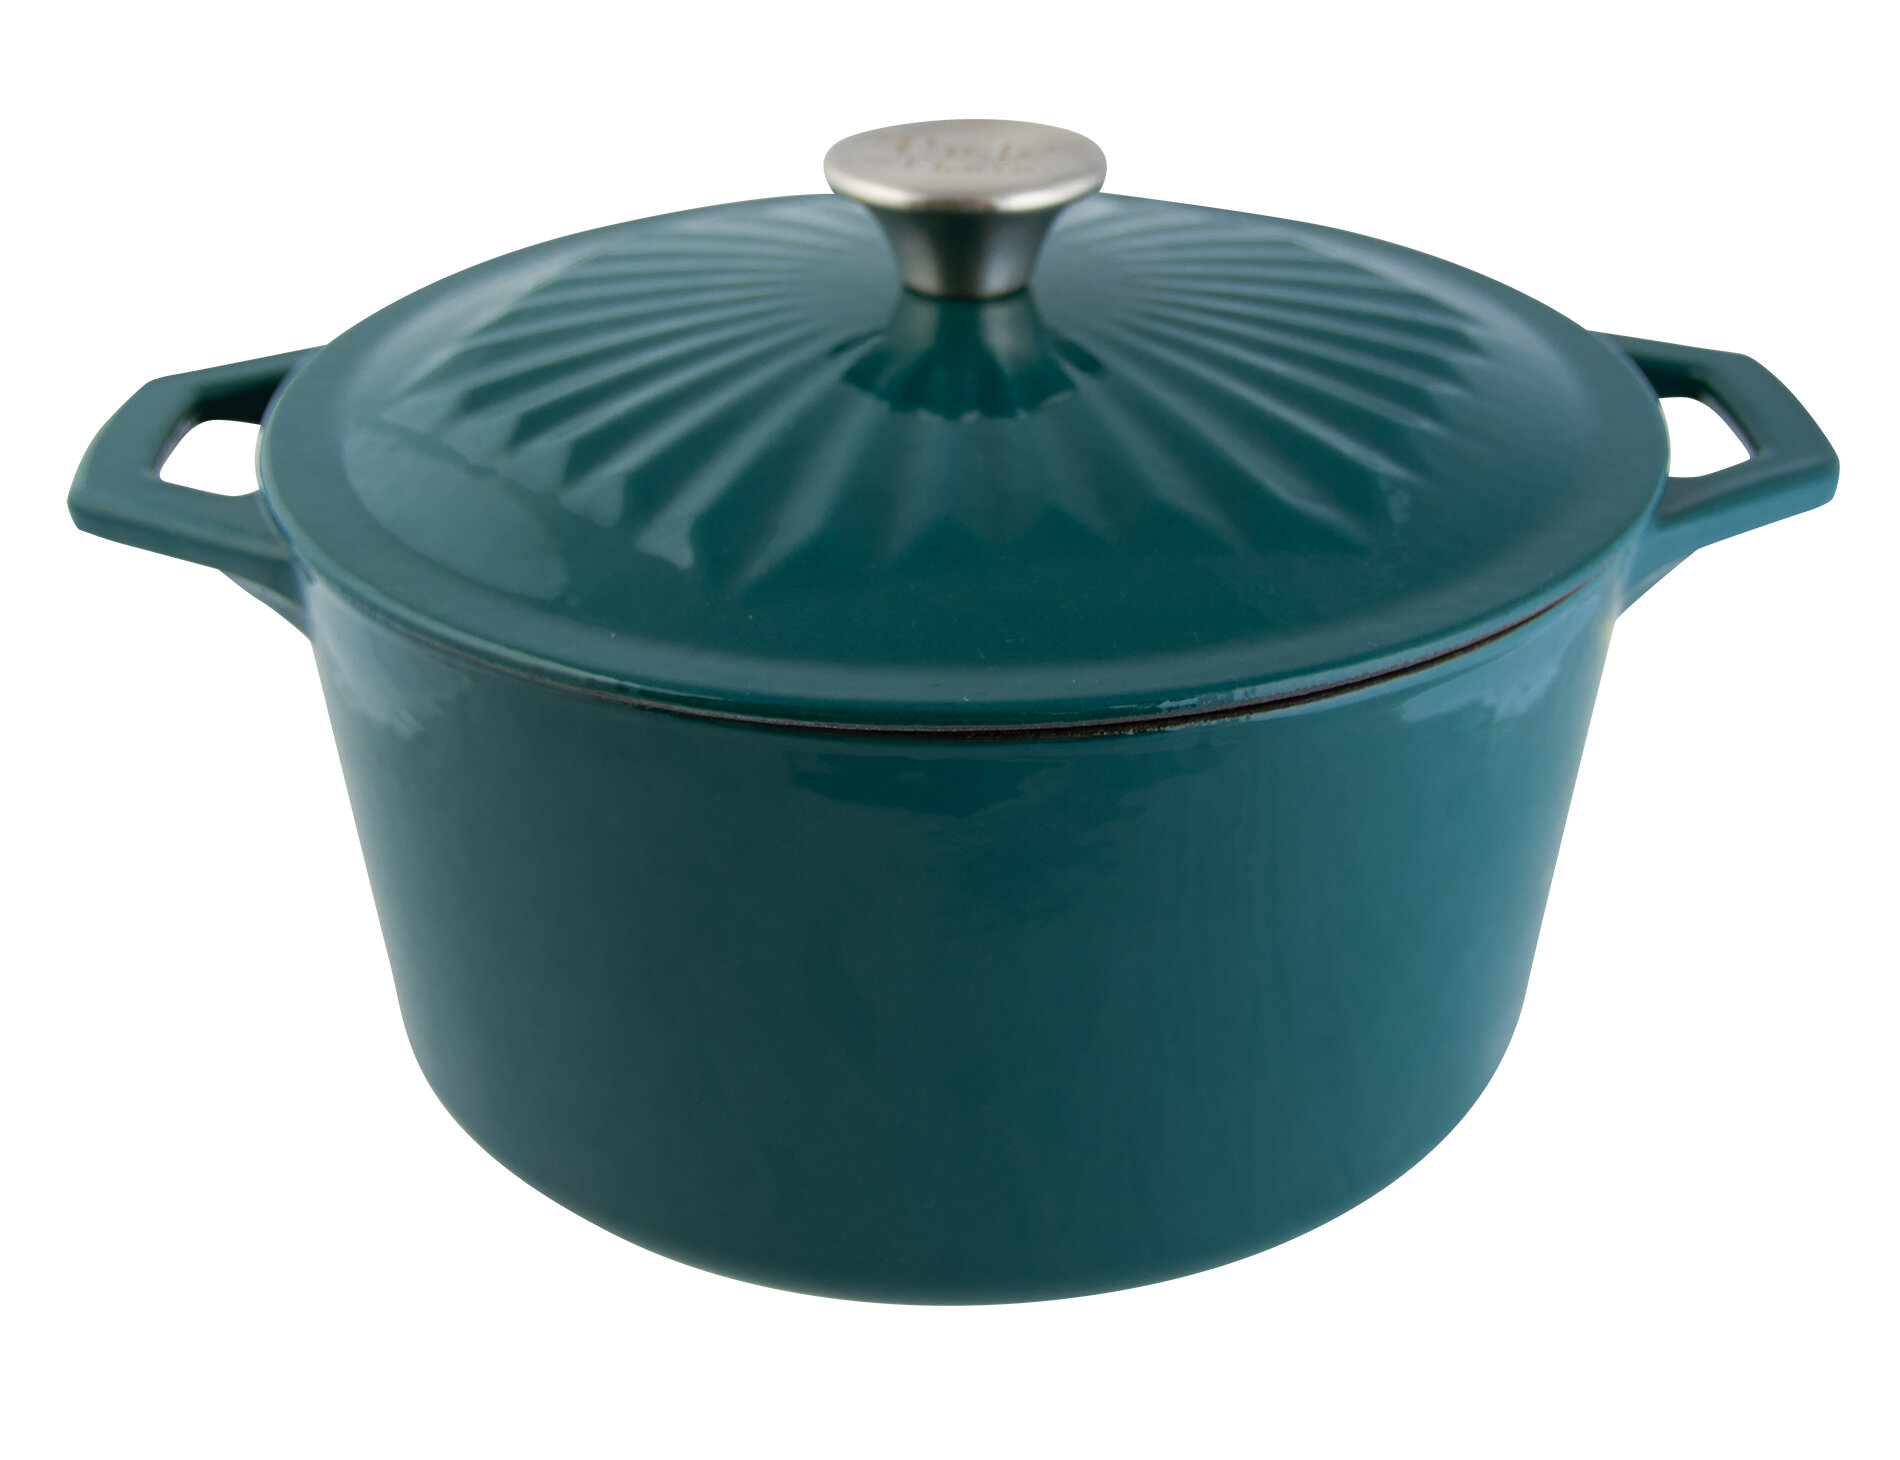 Cooking with Enameled Cast Iron - Taste of the South